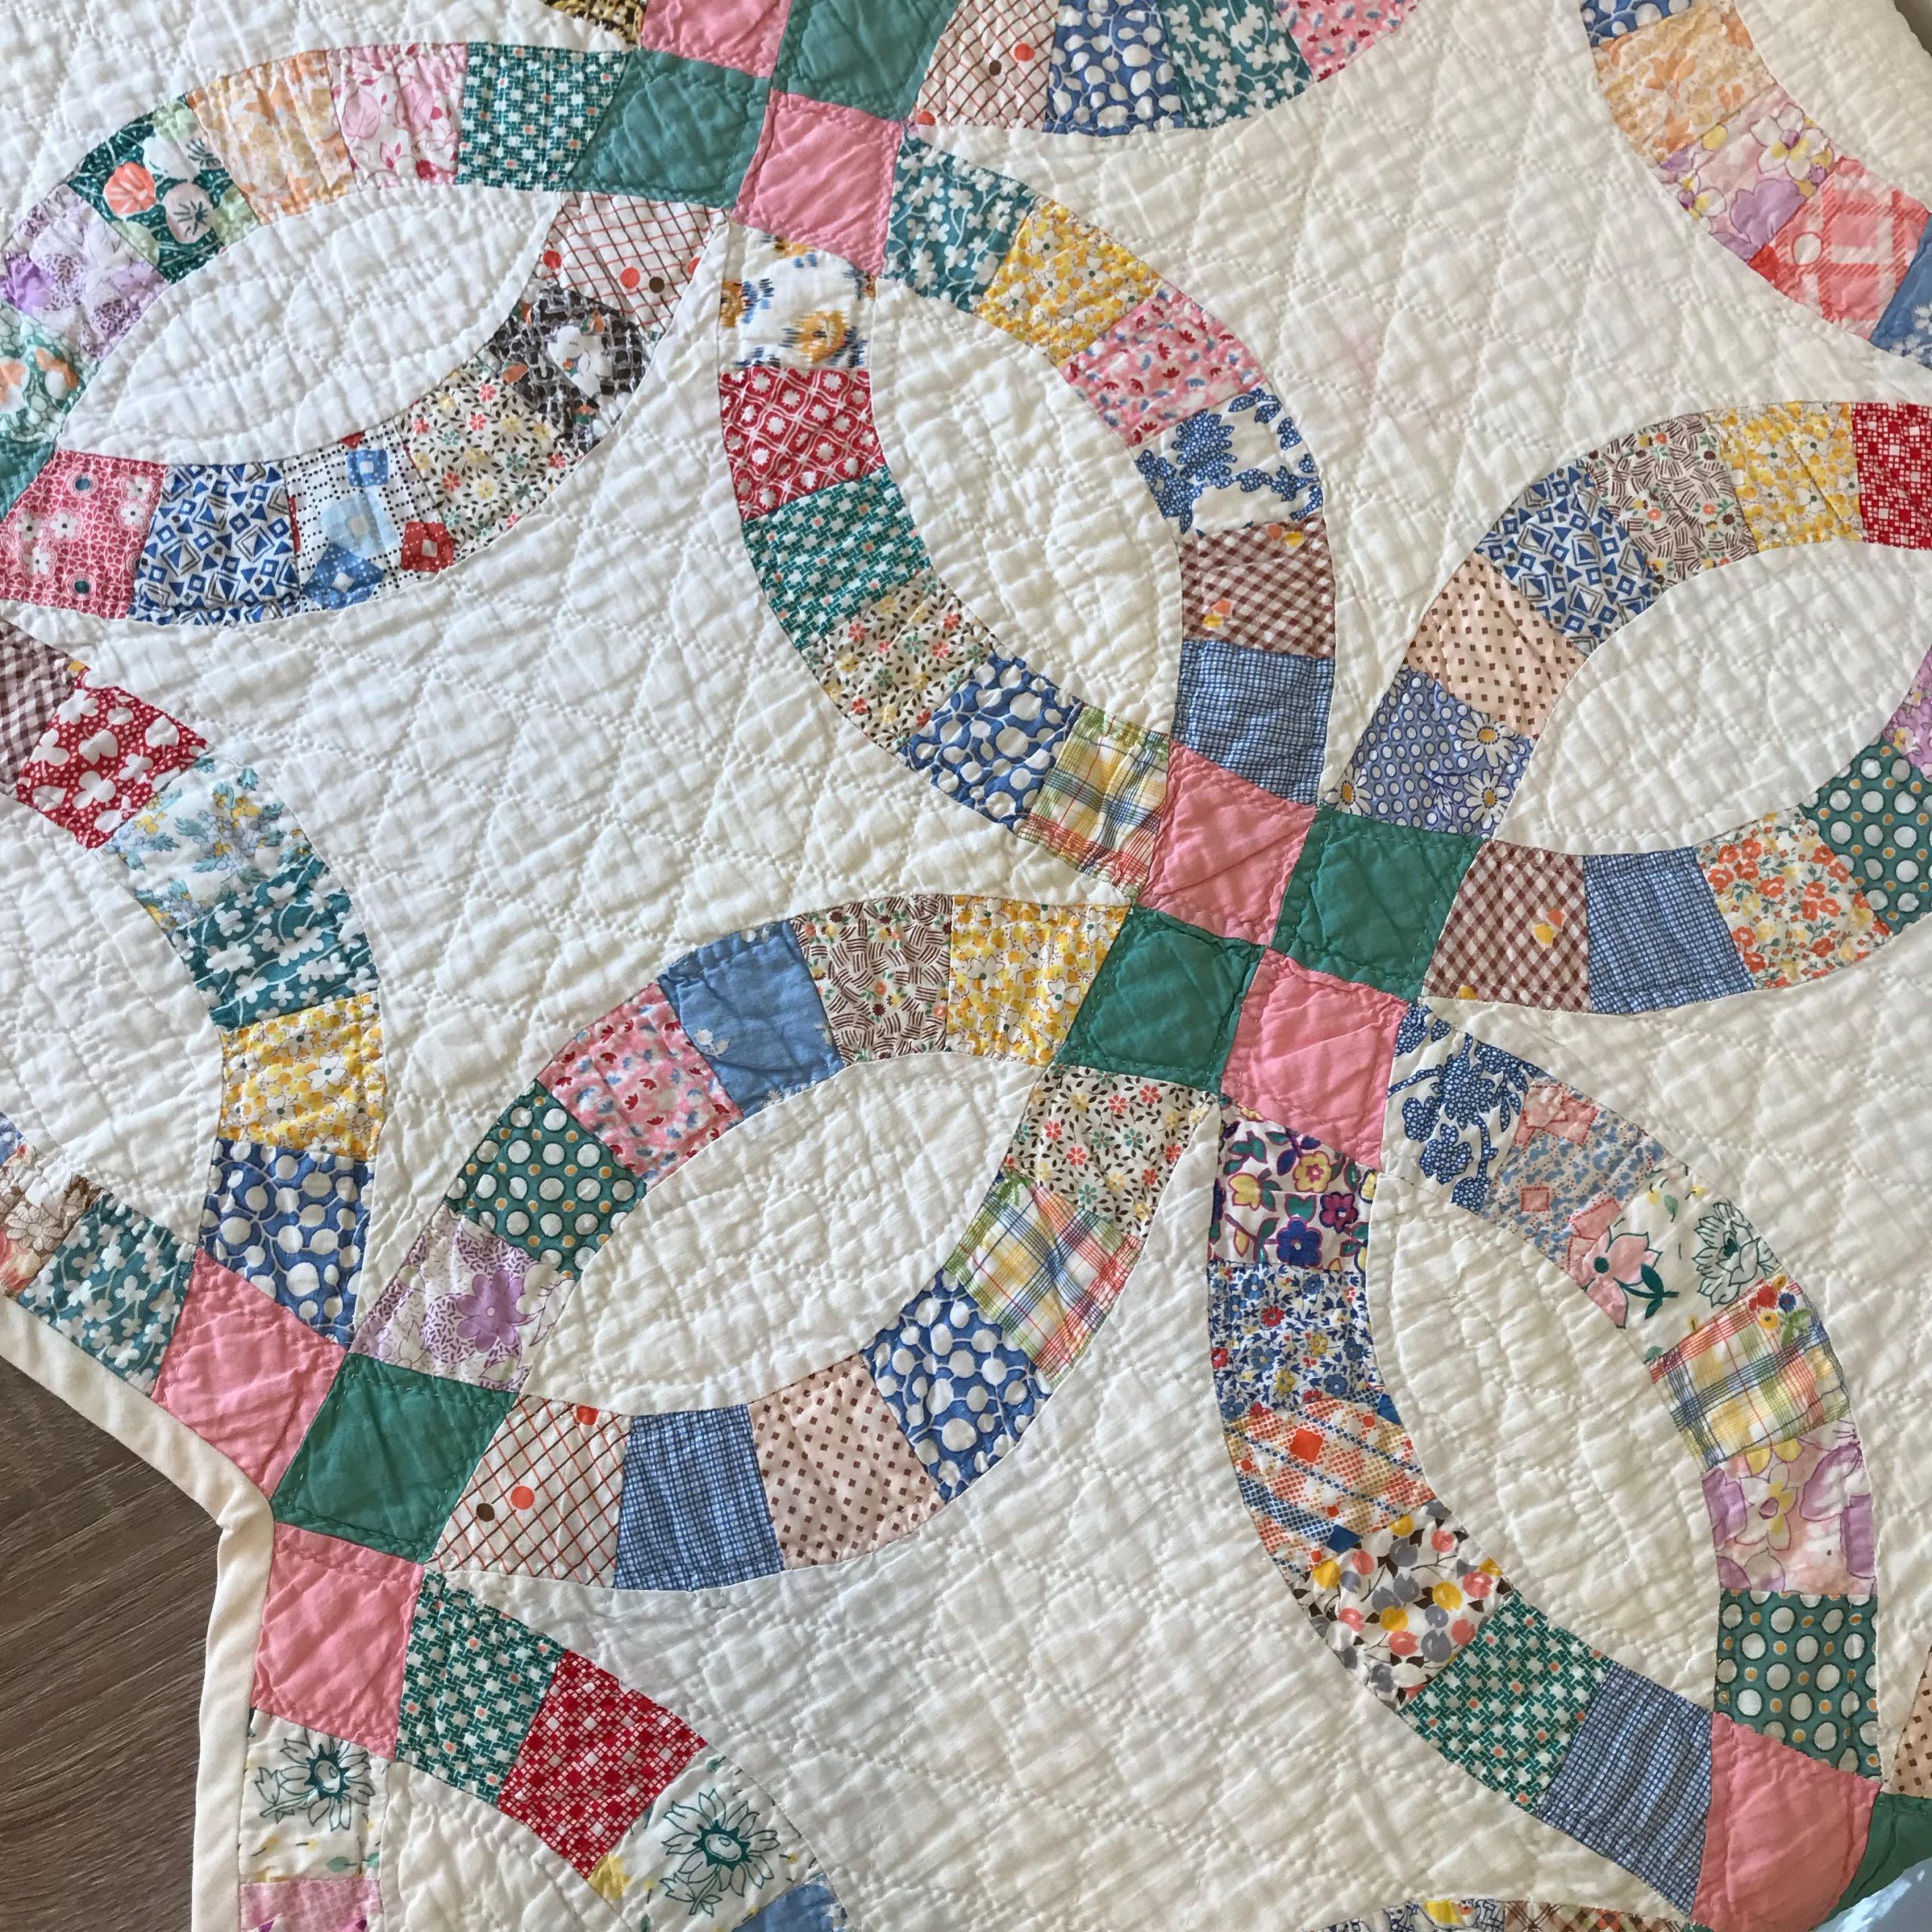 Wedding Ring Quilt
 Love this wedding ring quilt that was a wedding t from